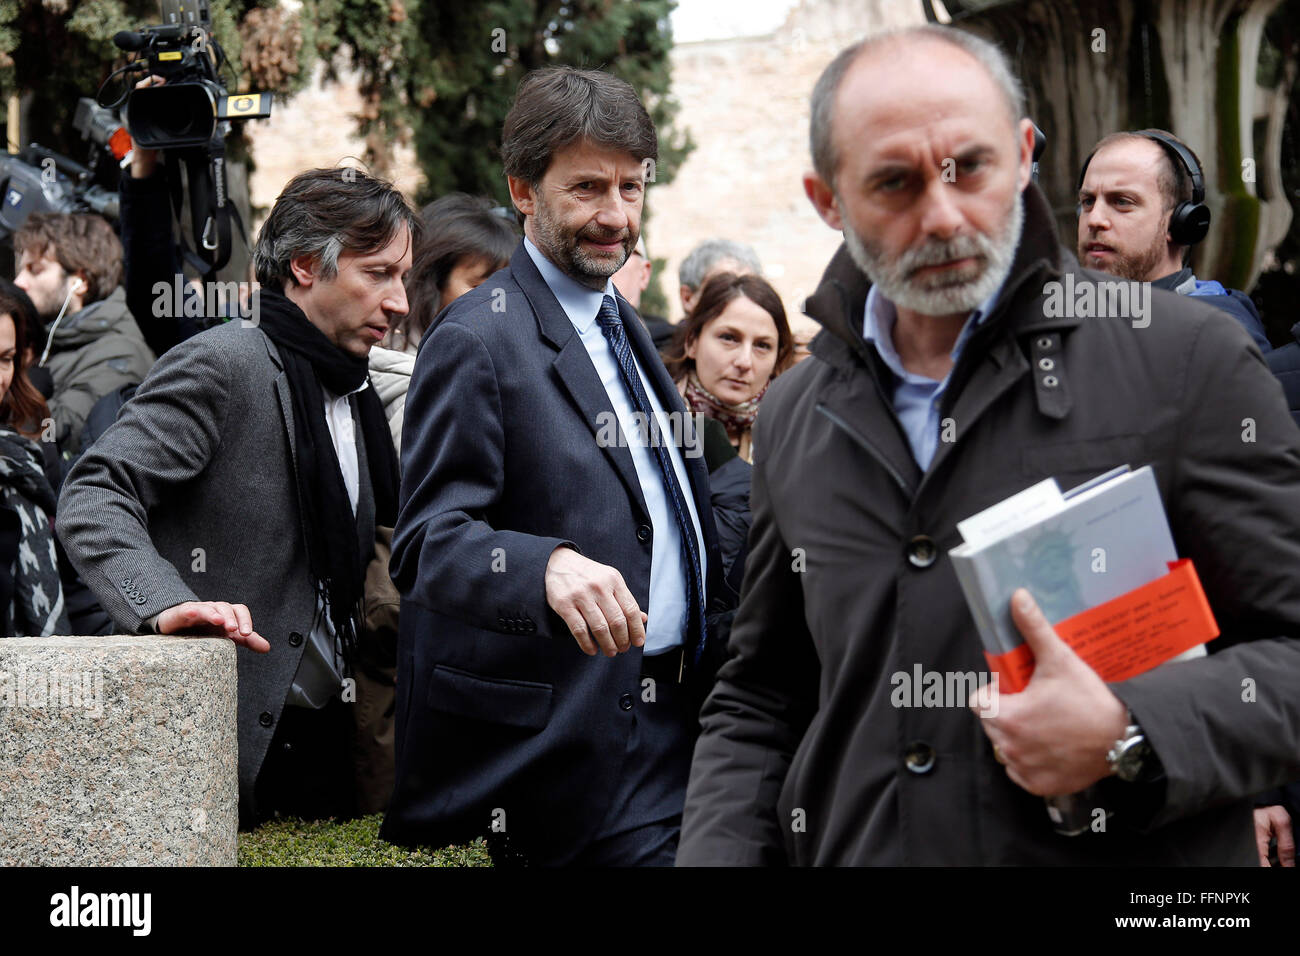 Rome, Italy. 16th February, 2016. Dario Franceschini Rome 16th February 2016. Baths of Diocleziano. Cerimony for the birth of the Italian Task Force, Unite for Heritage, in defense of the cultural heritage.  Credit:  Insidefoto/Alamy Live News Stock Photo